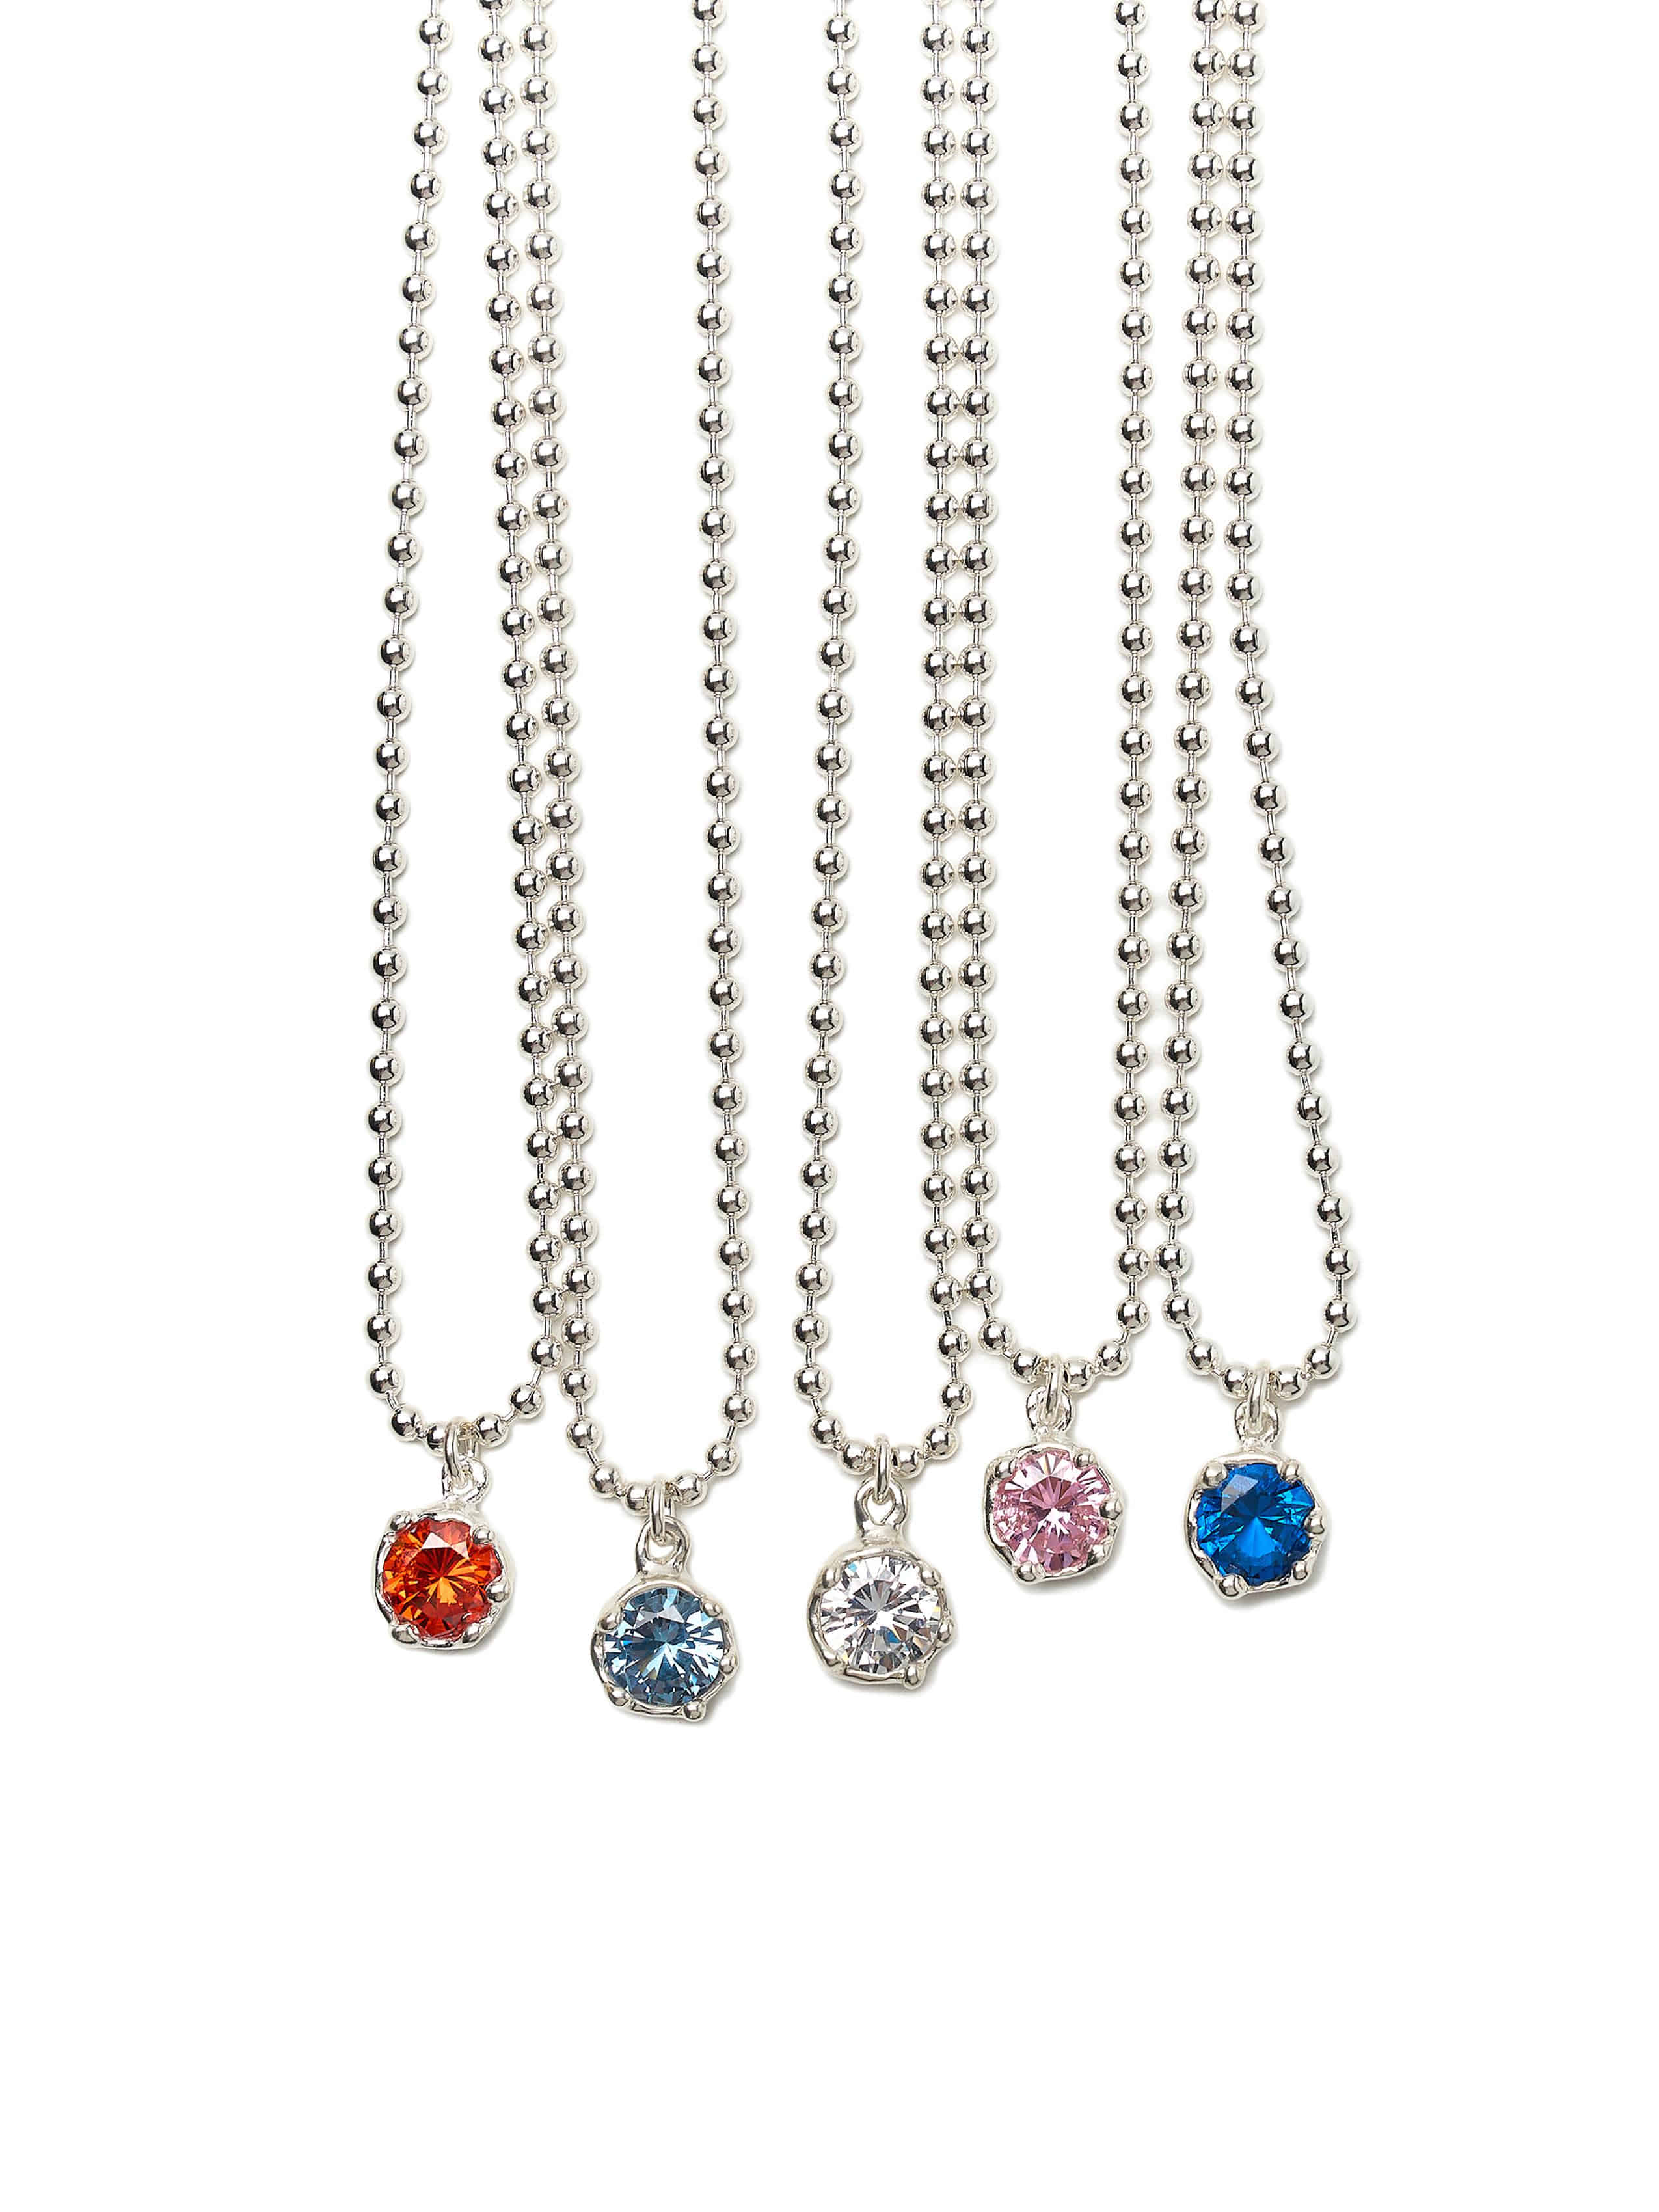 One Stone Ball Chain Necklace - 8mm